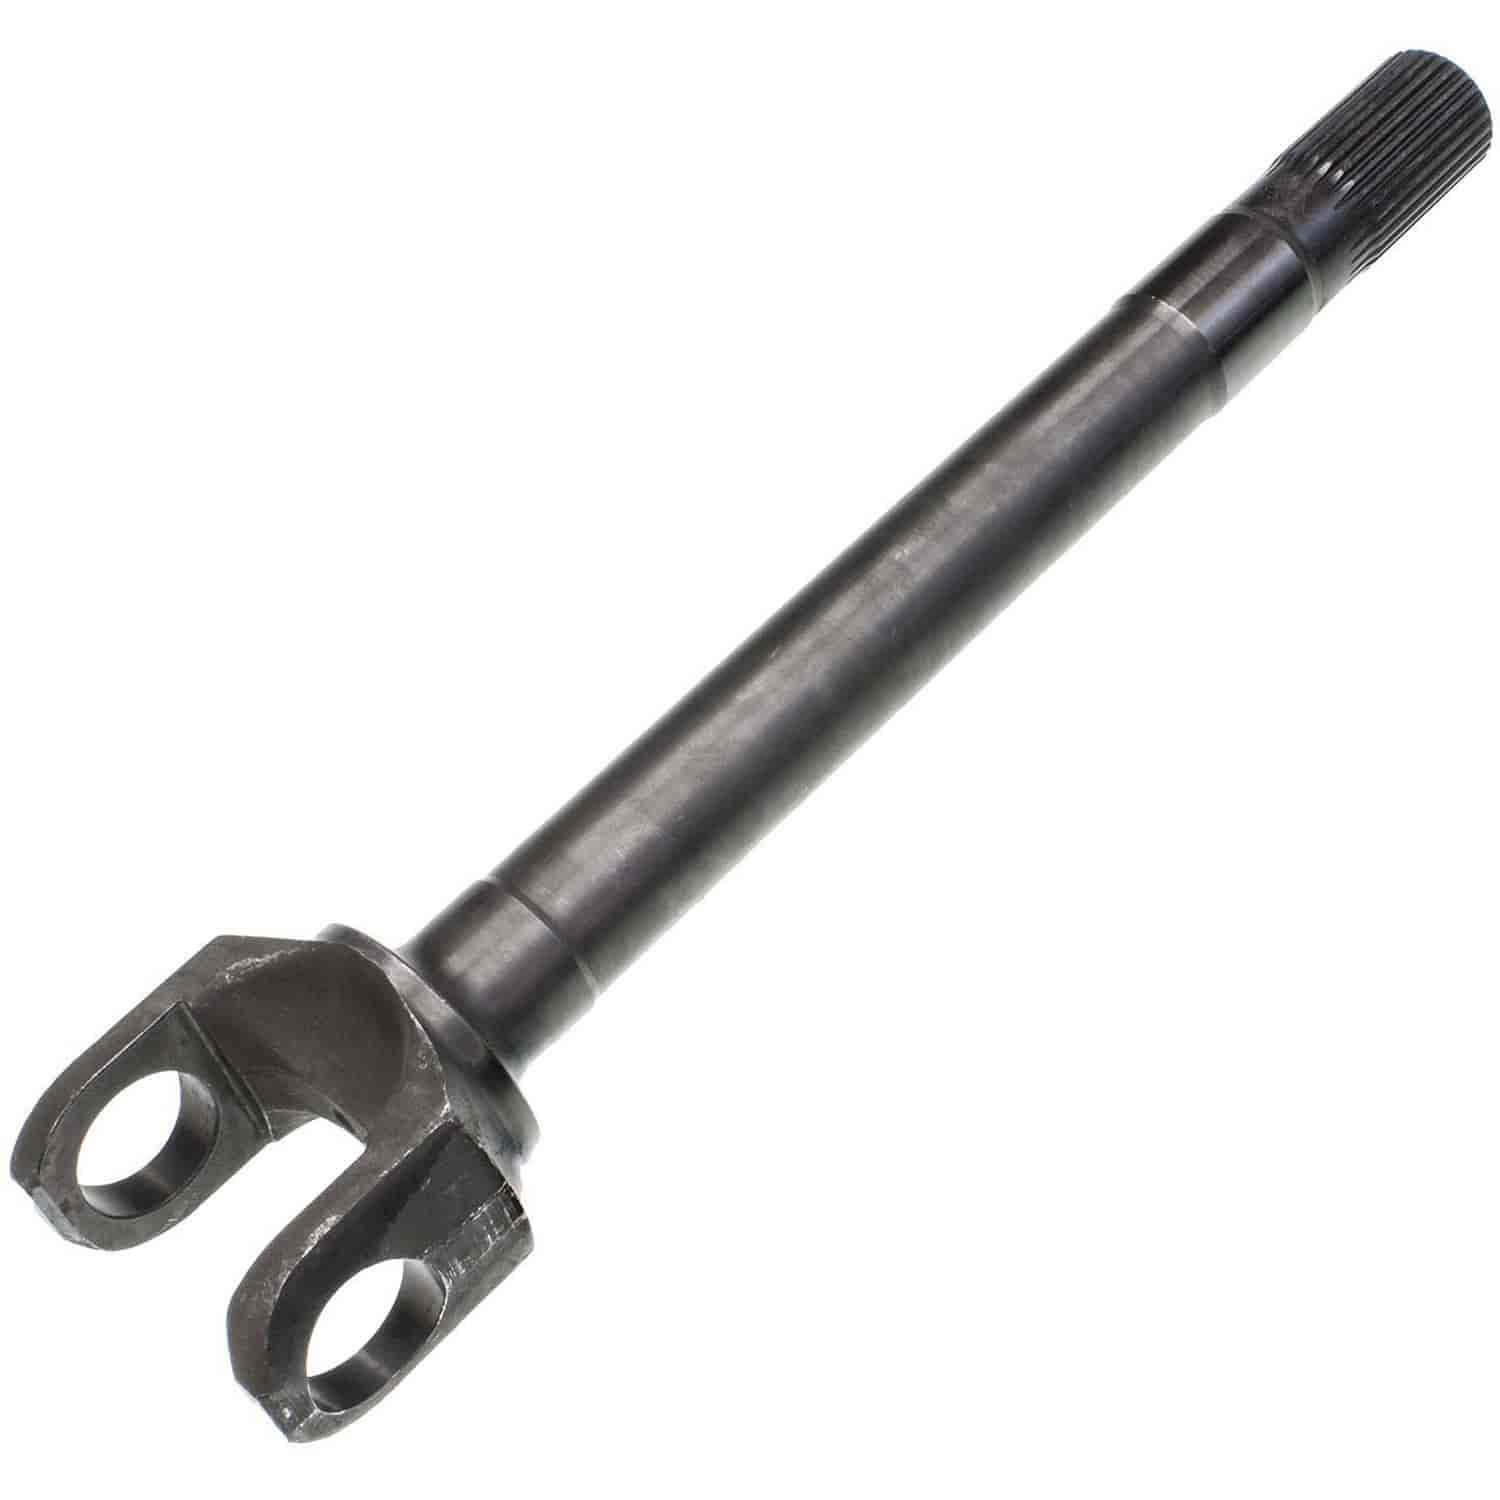 Axle Shaft 14.69 in. Overall Length 30 Spline Black Oxide Badged Under The Ten Factory Product Line